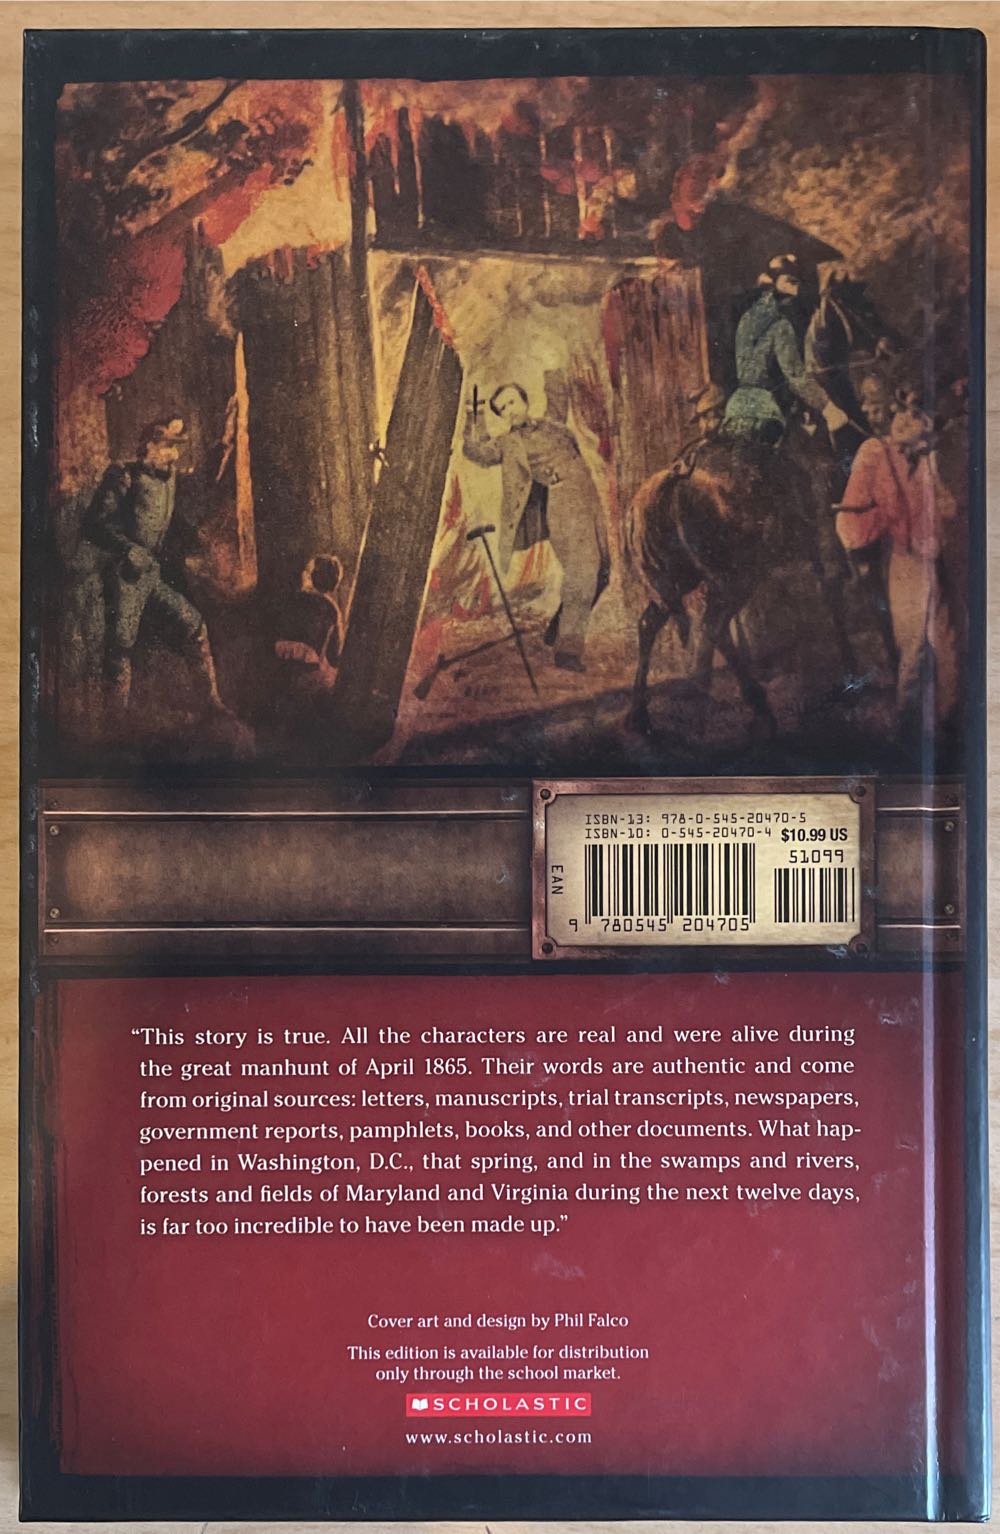 Chasing Lincoln’s Killer - James L. Swanson (A Scholastic Press - Hardcover) book collectible [Barcode 9780545204705] - Main Image 2